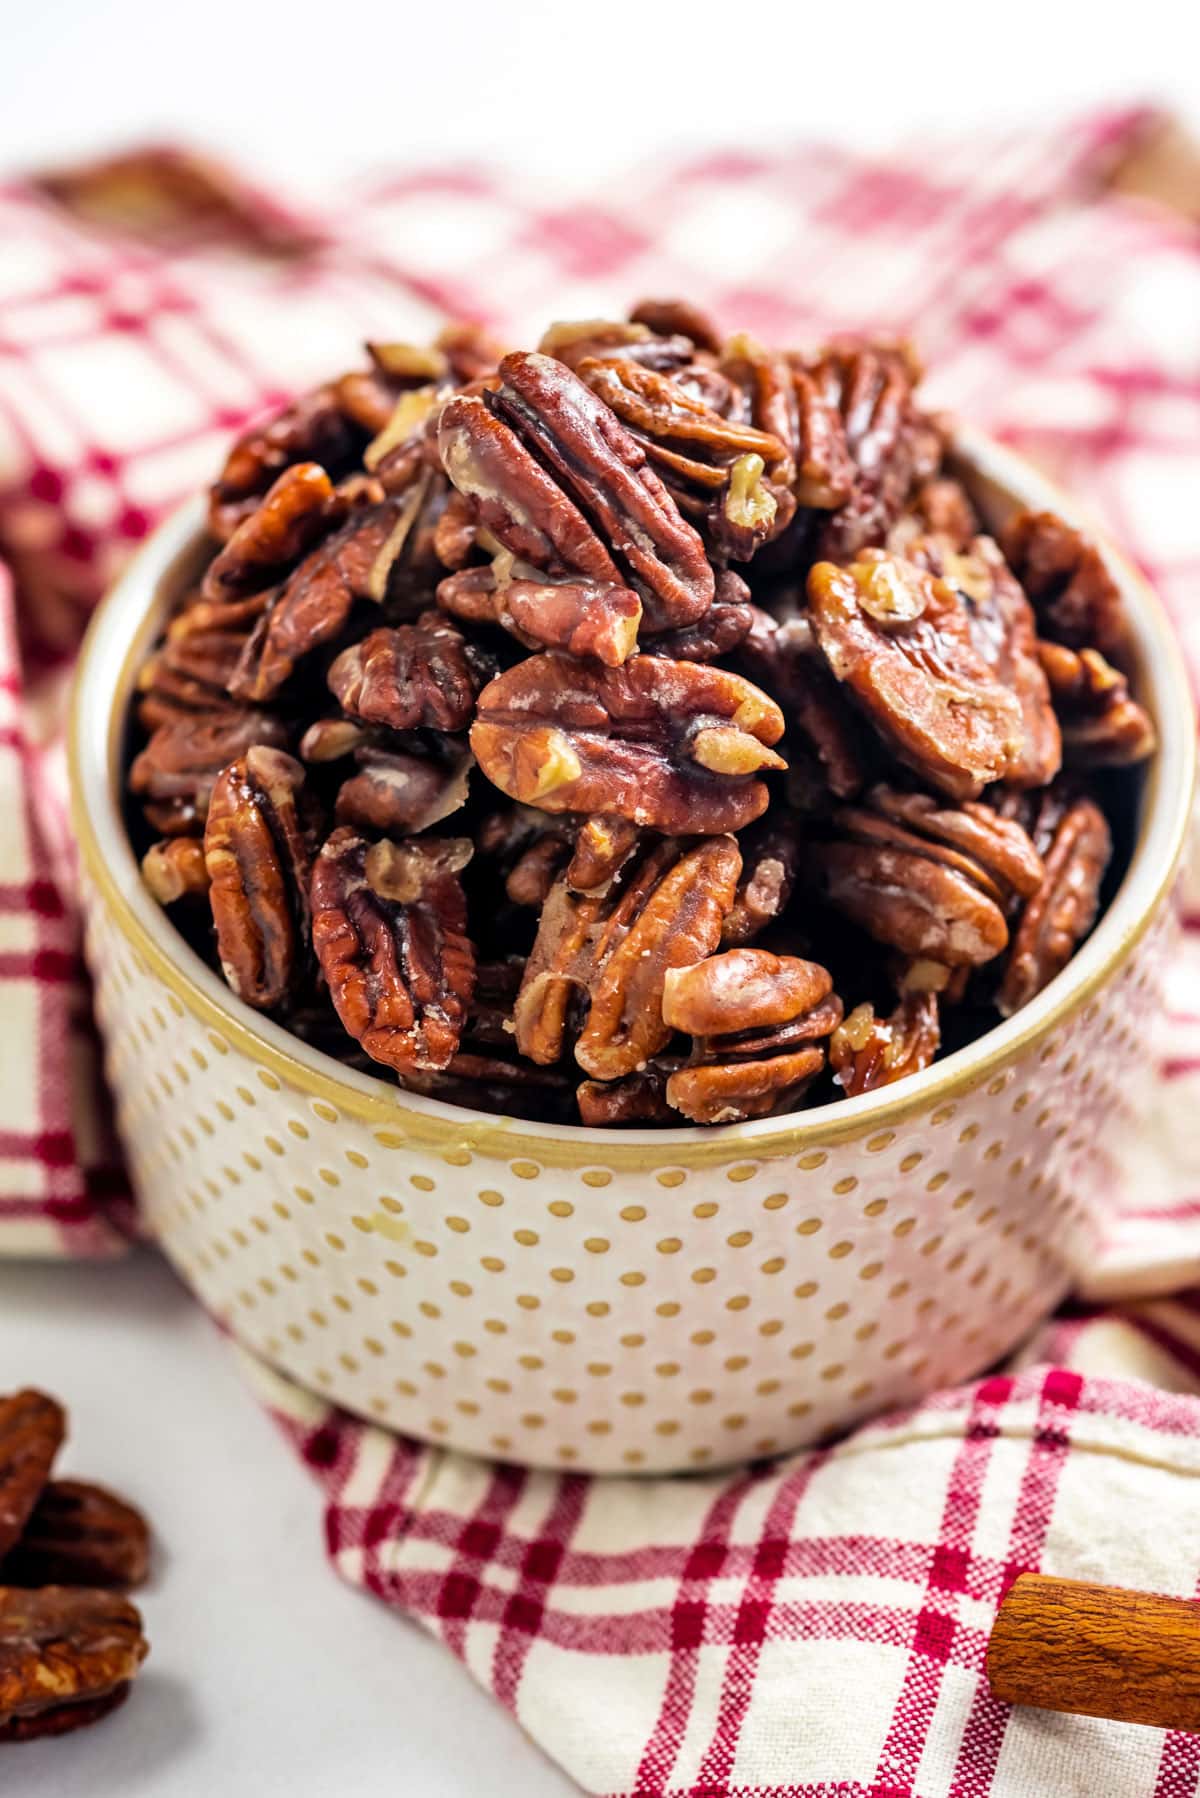 It takes less than 10 minutes to make delicious candied pecans thanks to a simple stovetop shortcut. Use this versatile glazed pecan recipe in salads, cheese boards, baked goods, and more. 